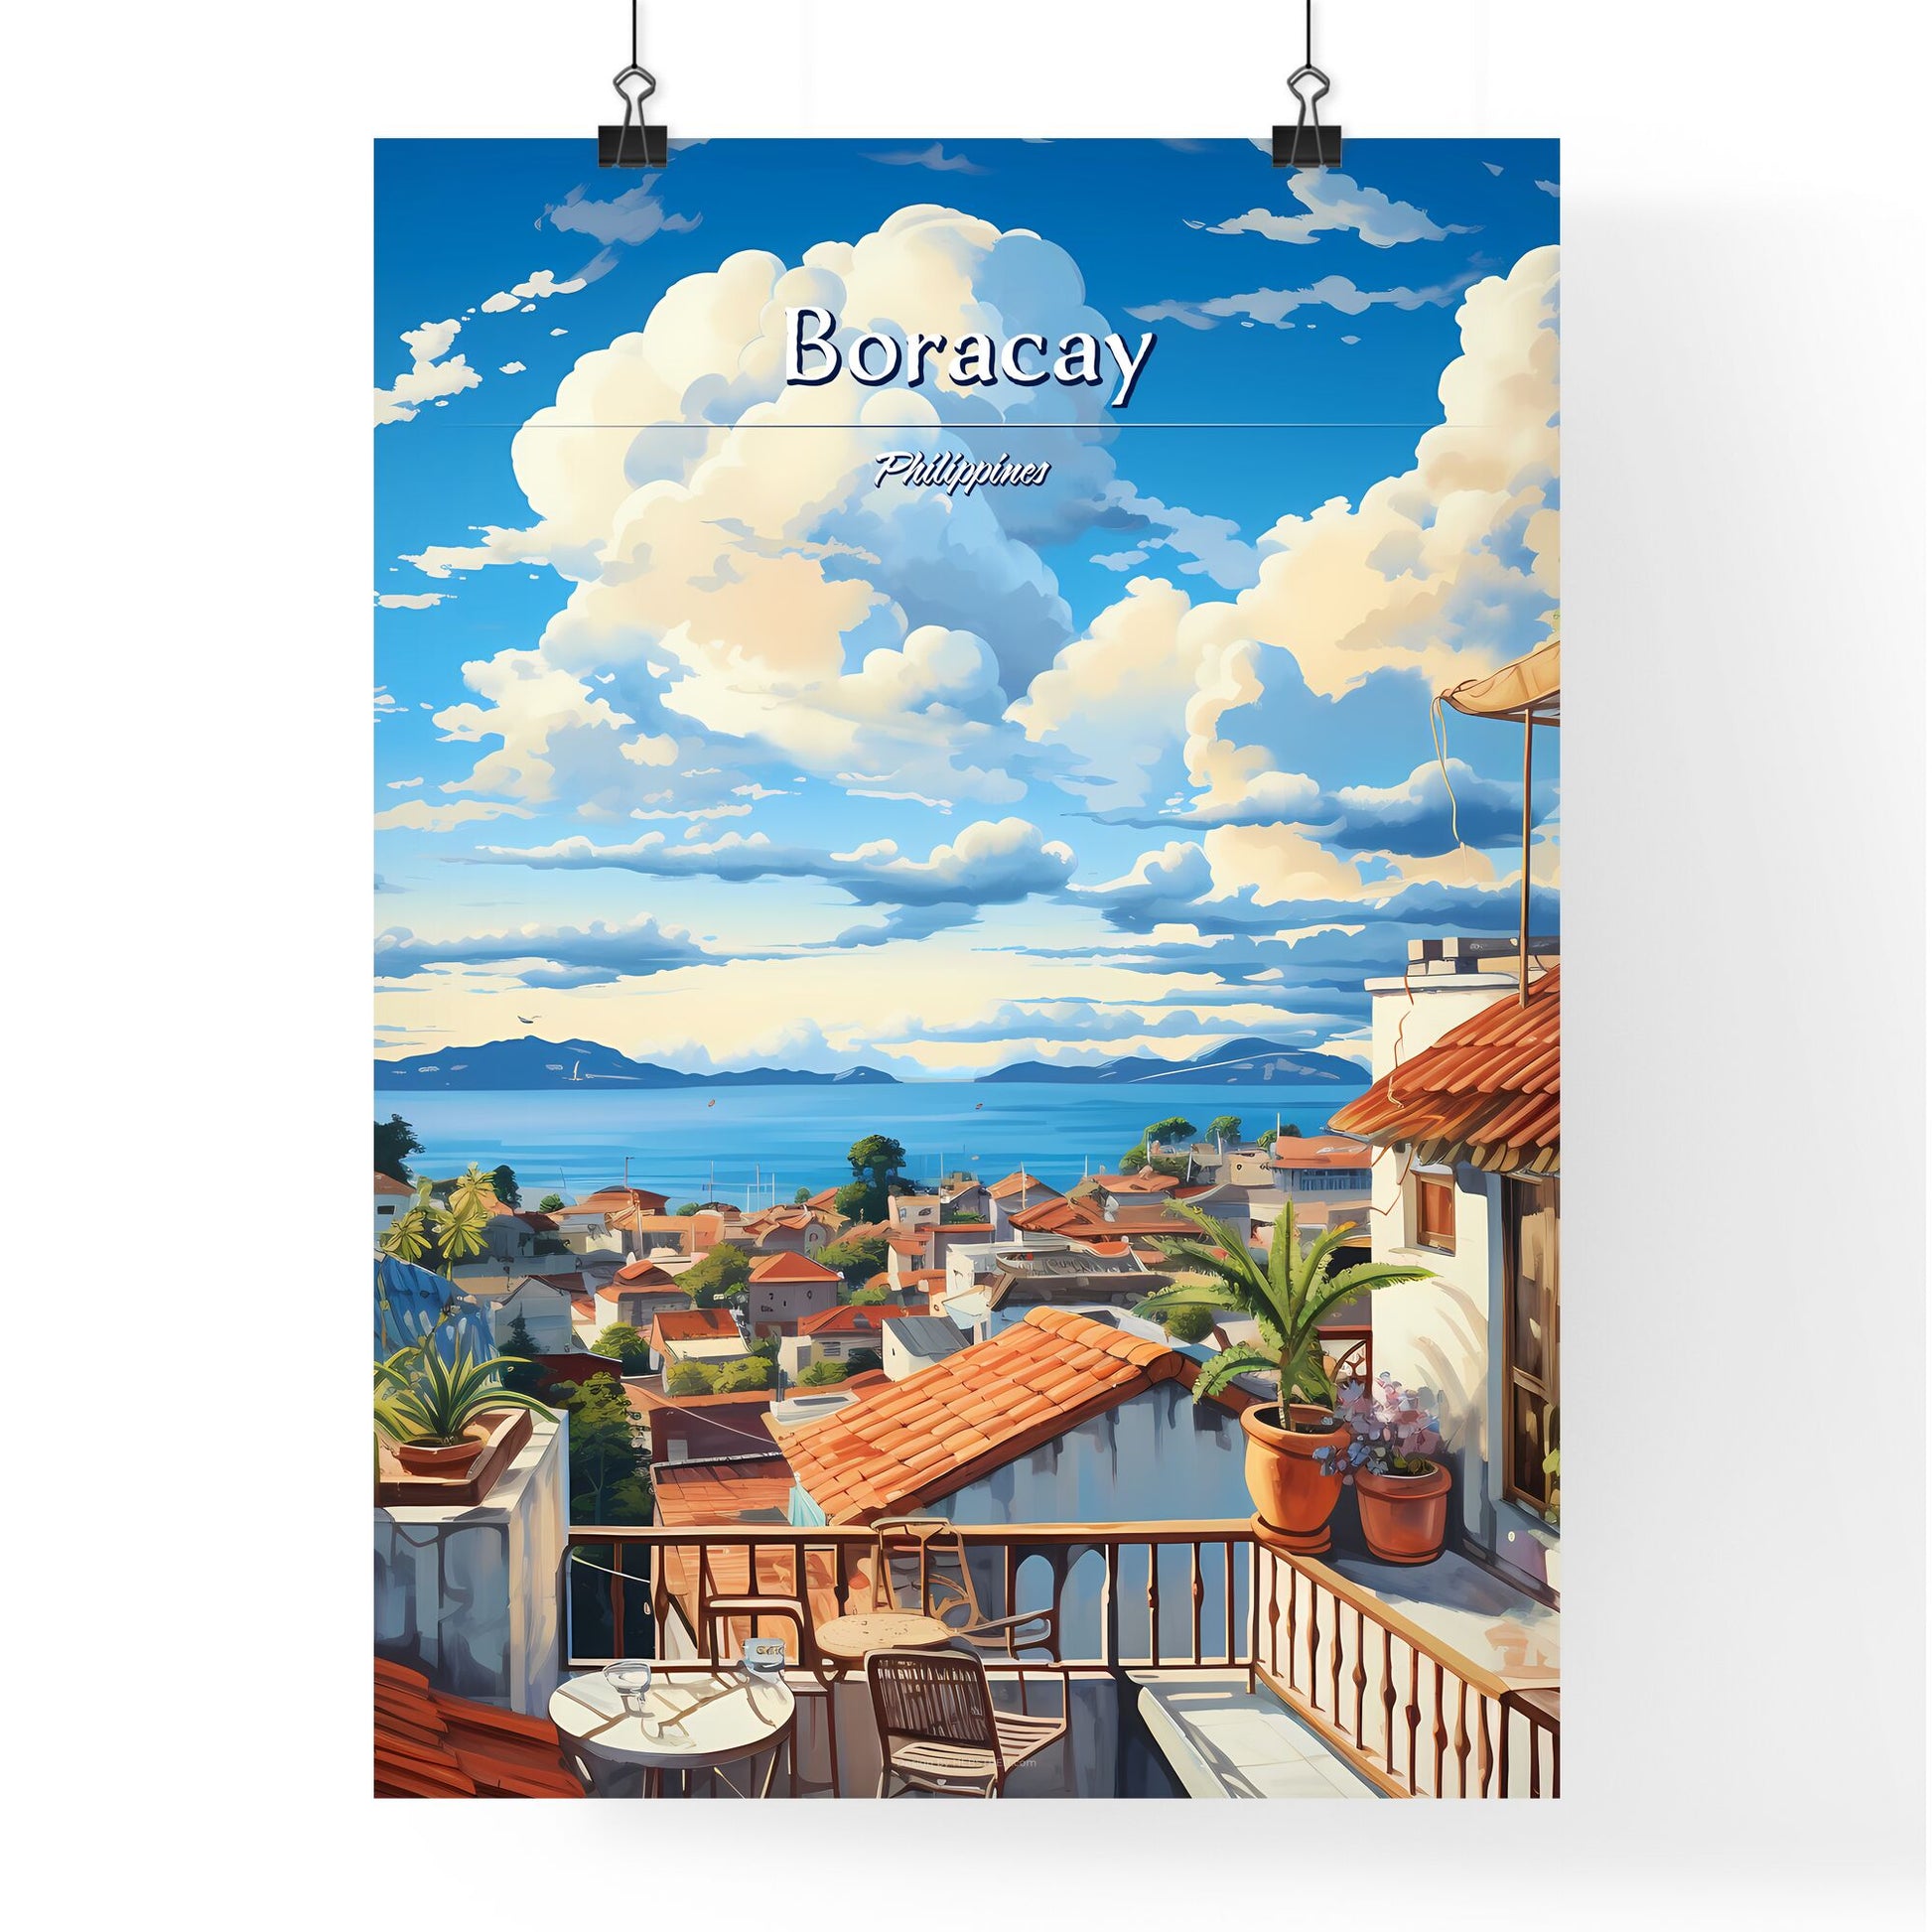 On the roofs of Boracay, Philippines - Art print of a balcony overlooking a city Default Title